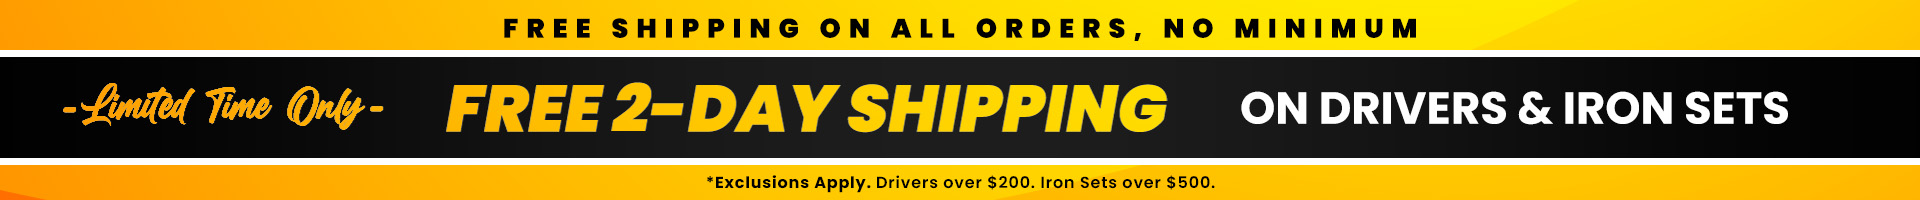 Free 2-Day Shipping on Drivers and Iron Sets